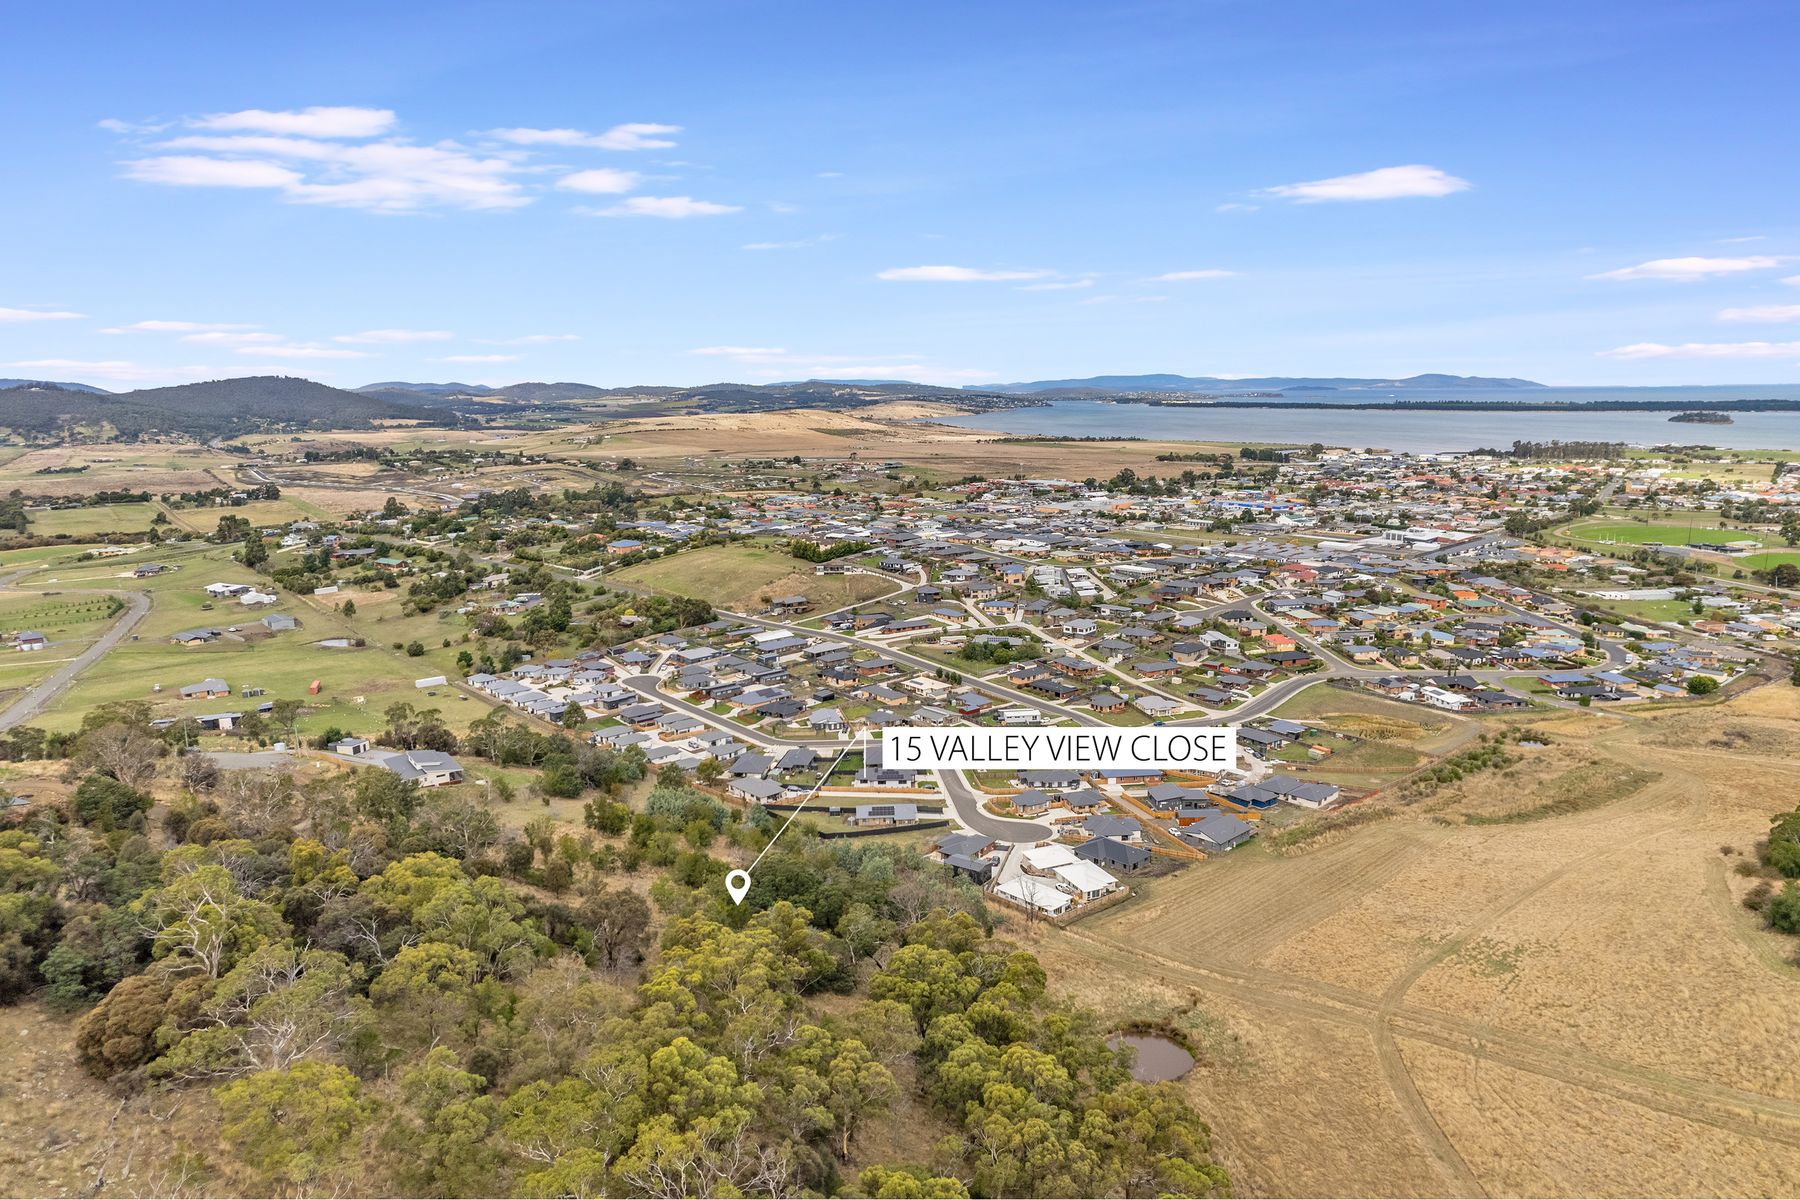 Valley View Close, 15, Sorell 5